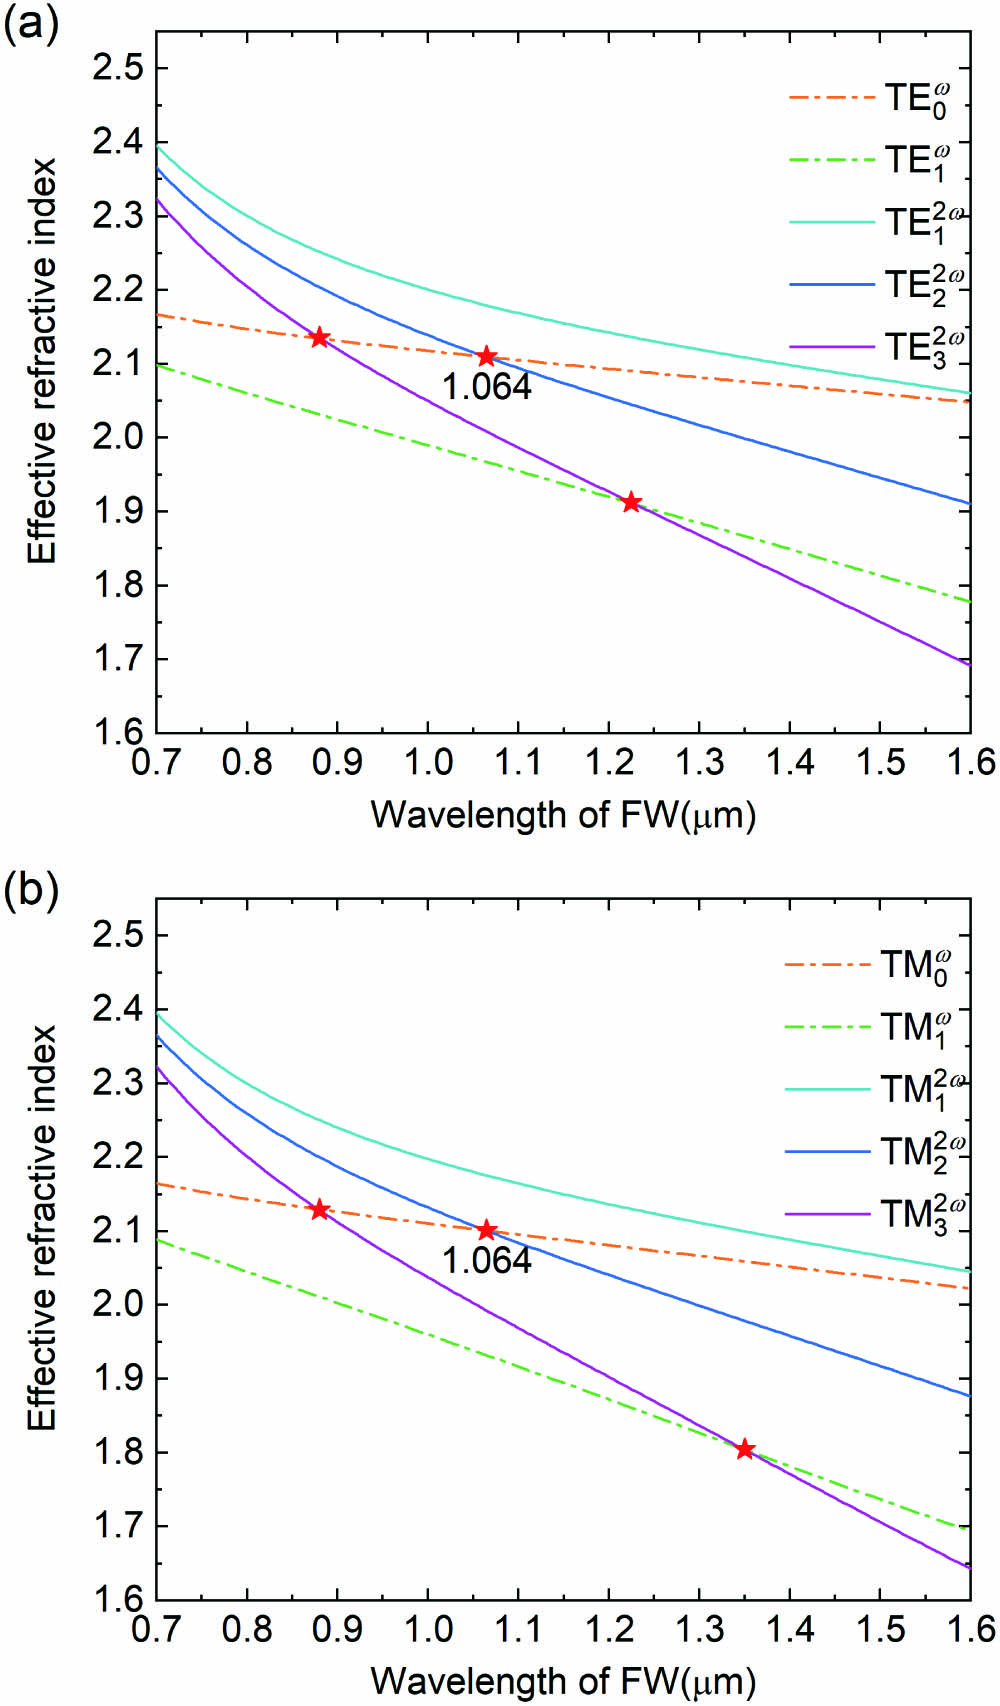 Dispersion curves of EL+EL→EL phase-matching scheme in LN waveguide for various guided modes. The red star point represents the phase-matching point: (a) x-cut LN thin film; (b) z-cut LN thin film.